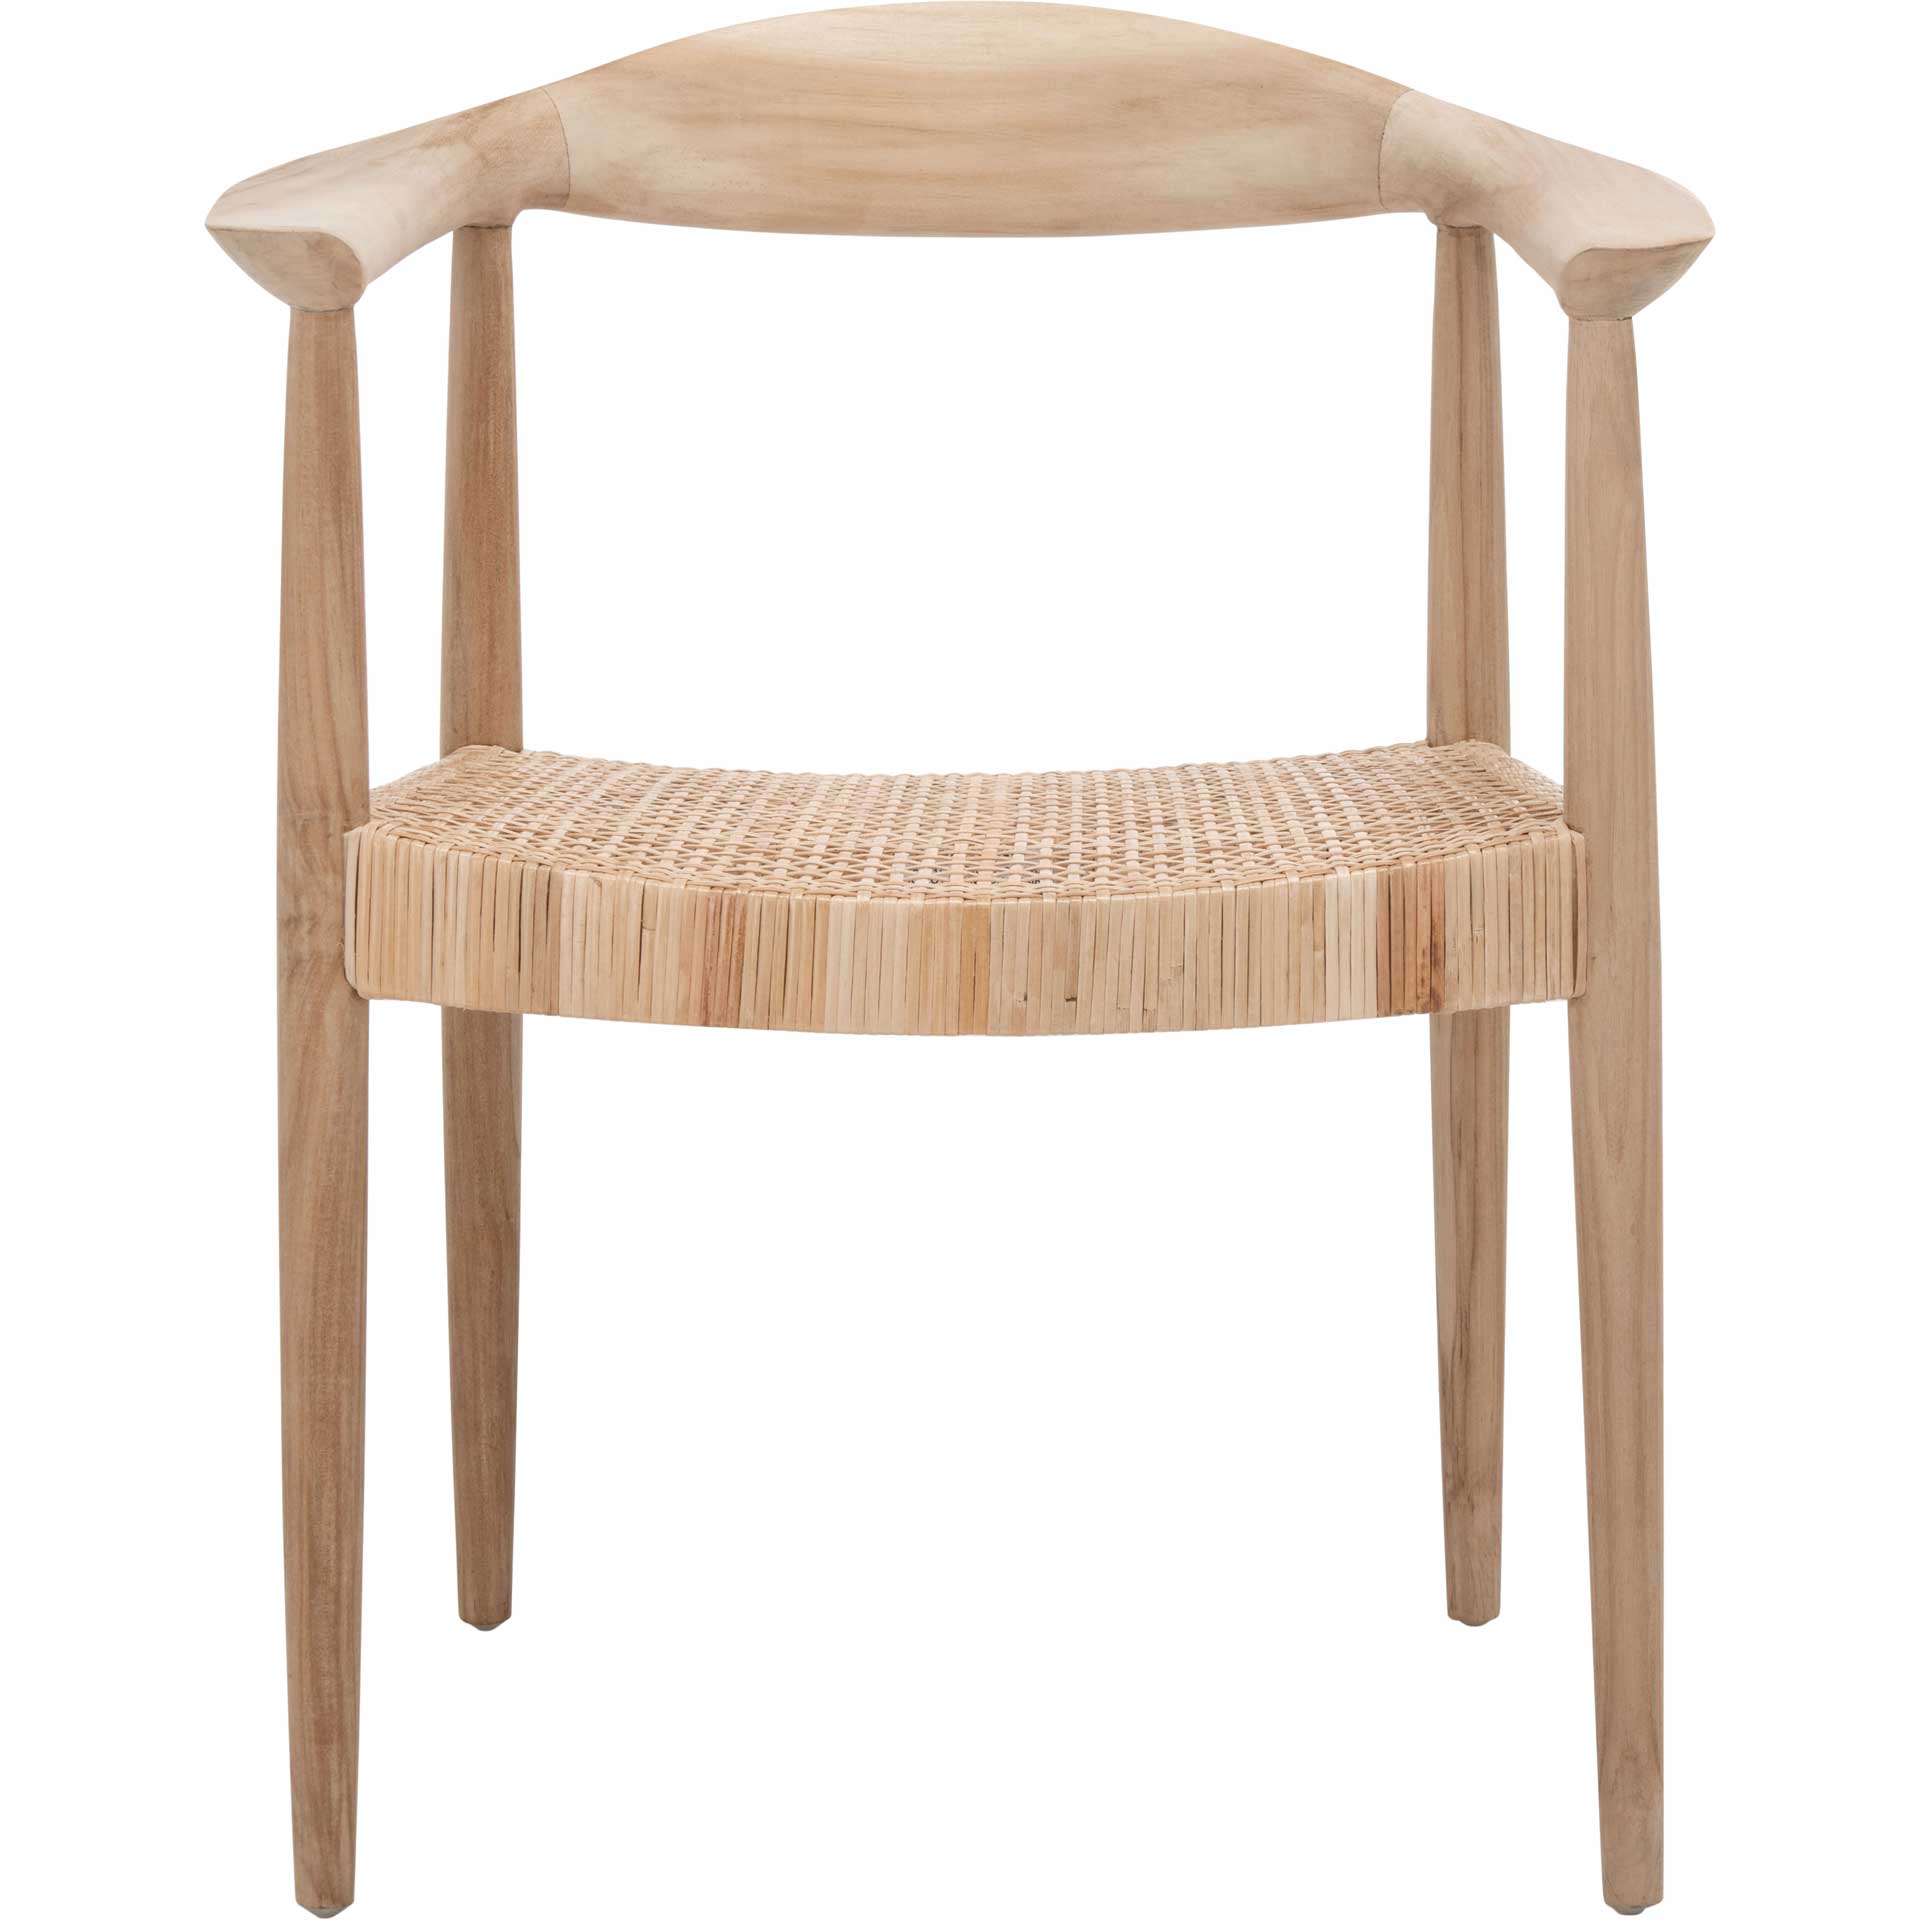 Sia Rattan Peel Accent Chair Natural